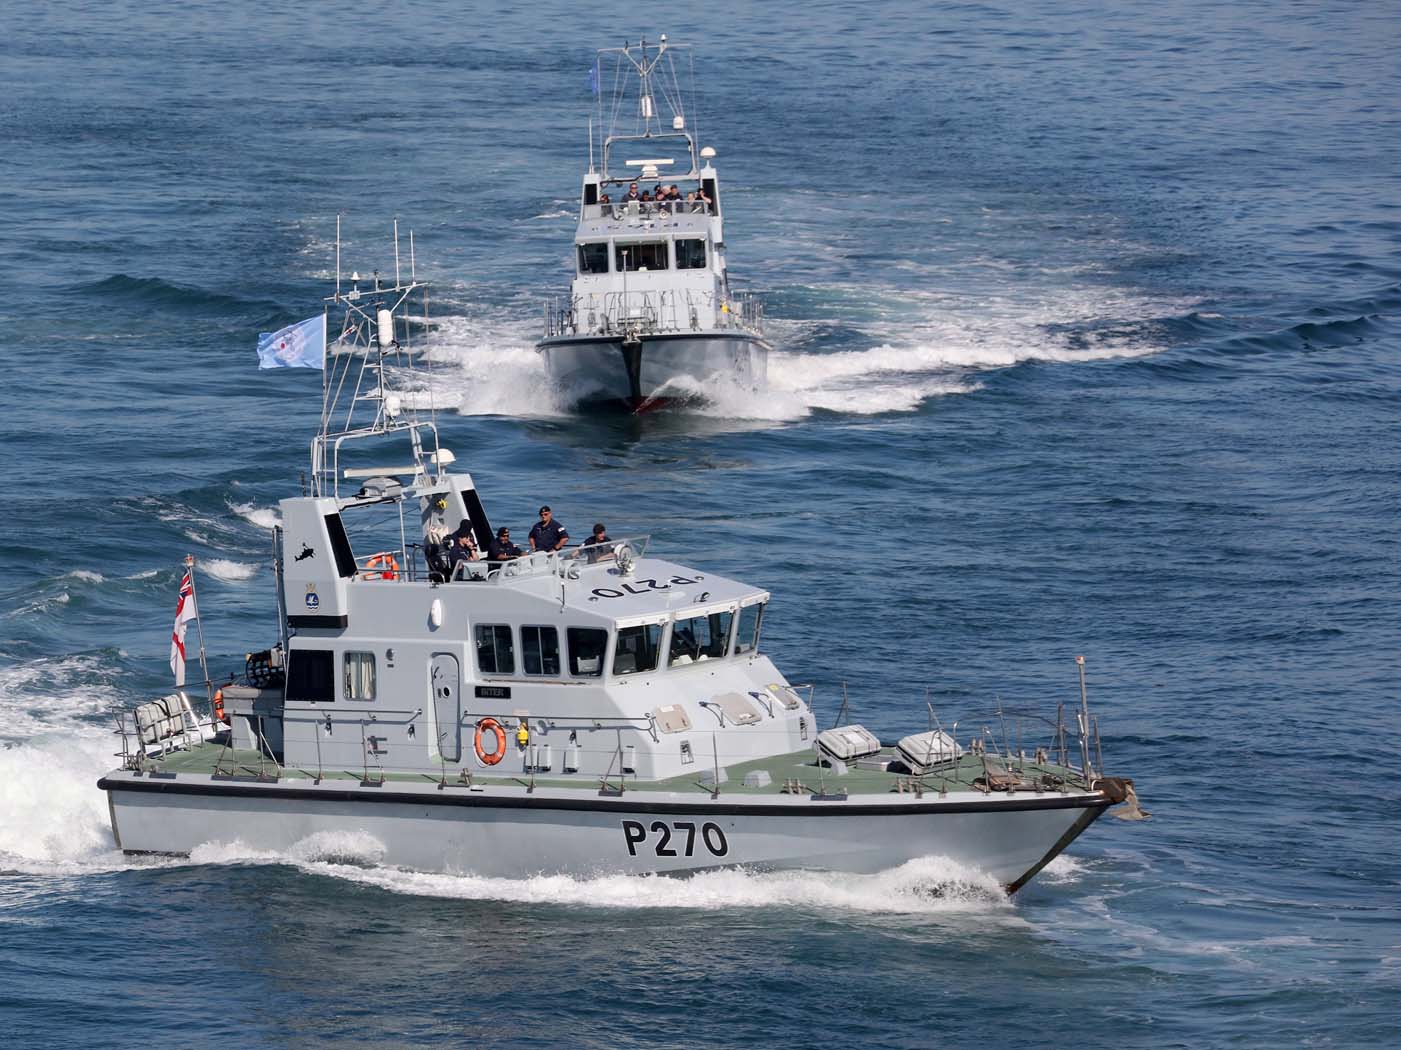 Royal Navy’s smallest ships take part in squadron exercise| Royal Navy